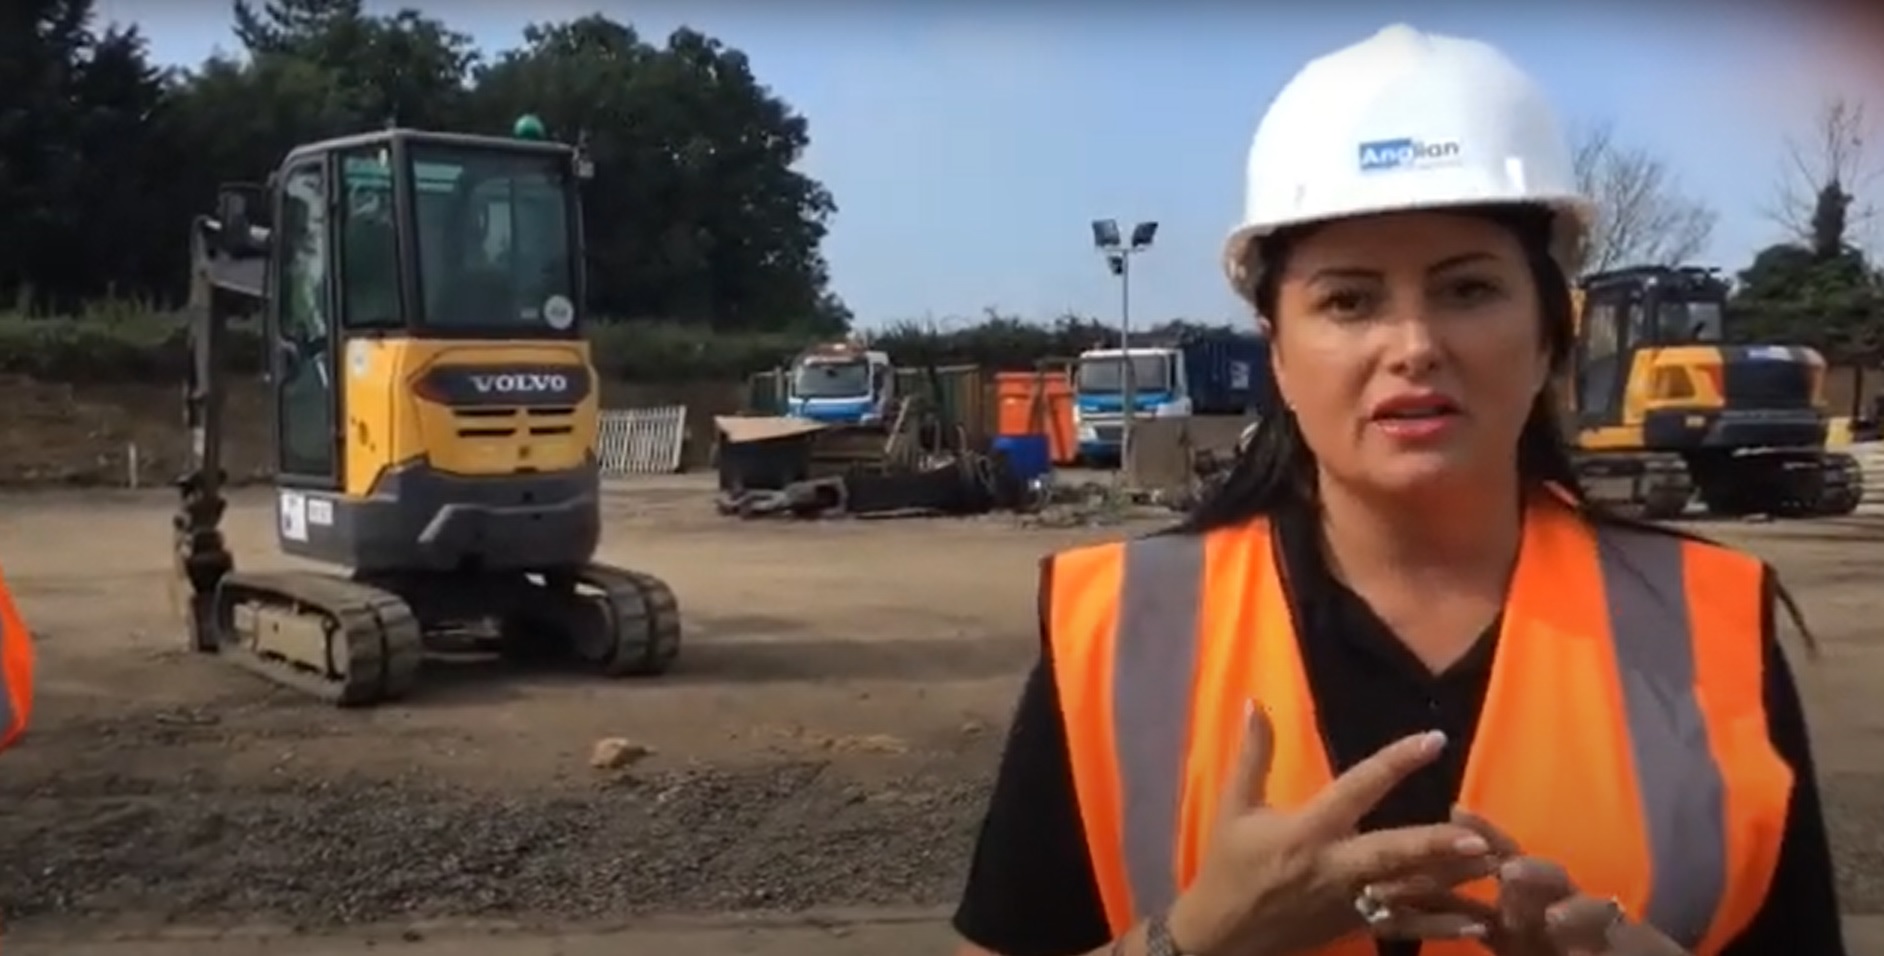 Interview with Asbestos Manager at Anglian Demolition - Balfour Beatty